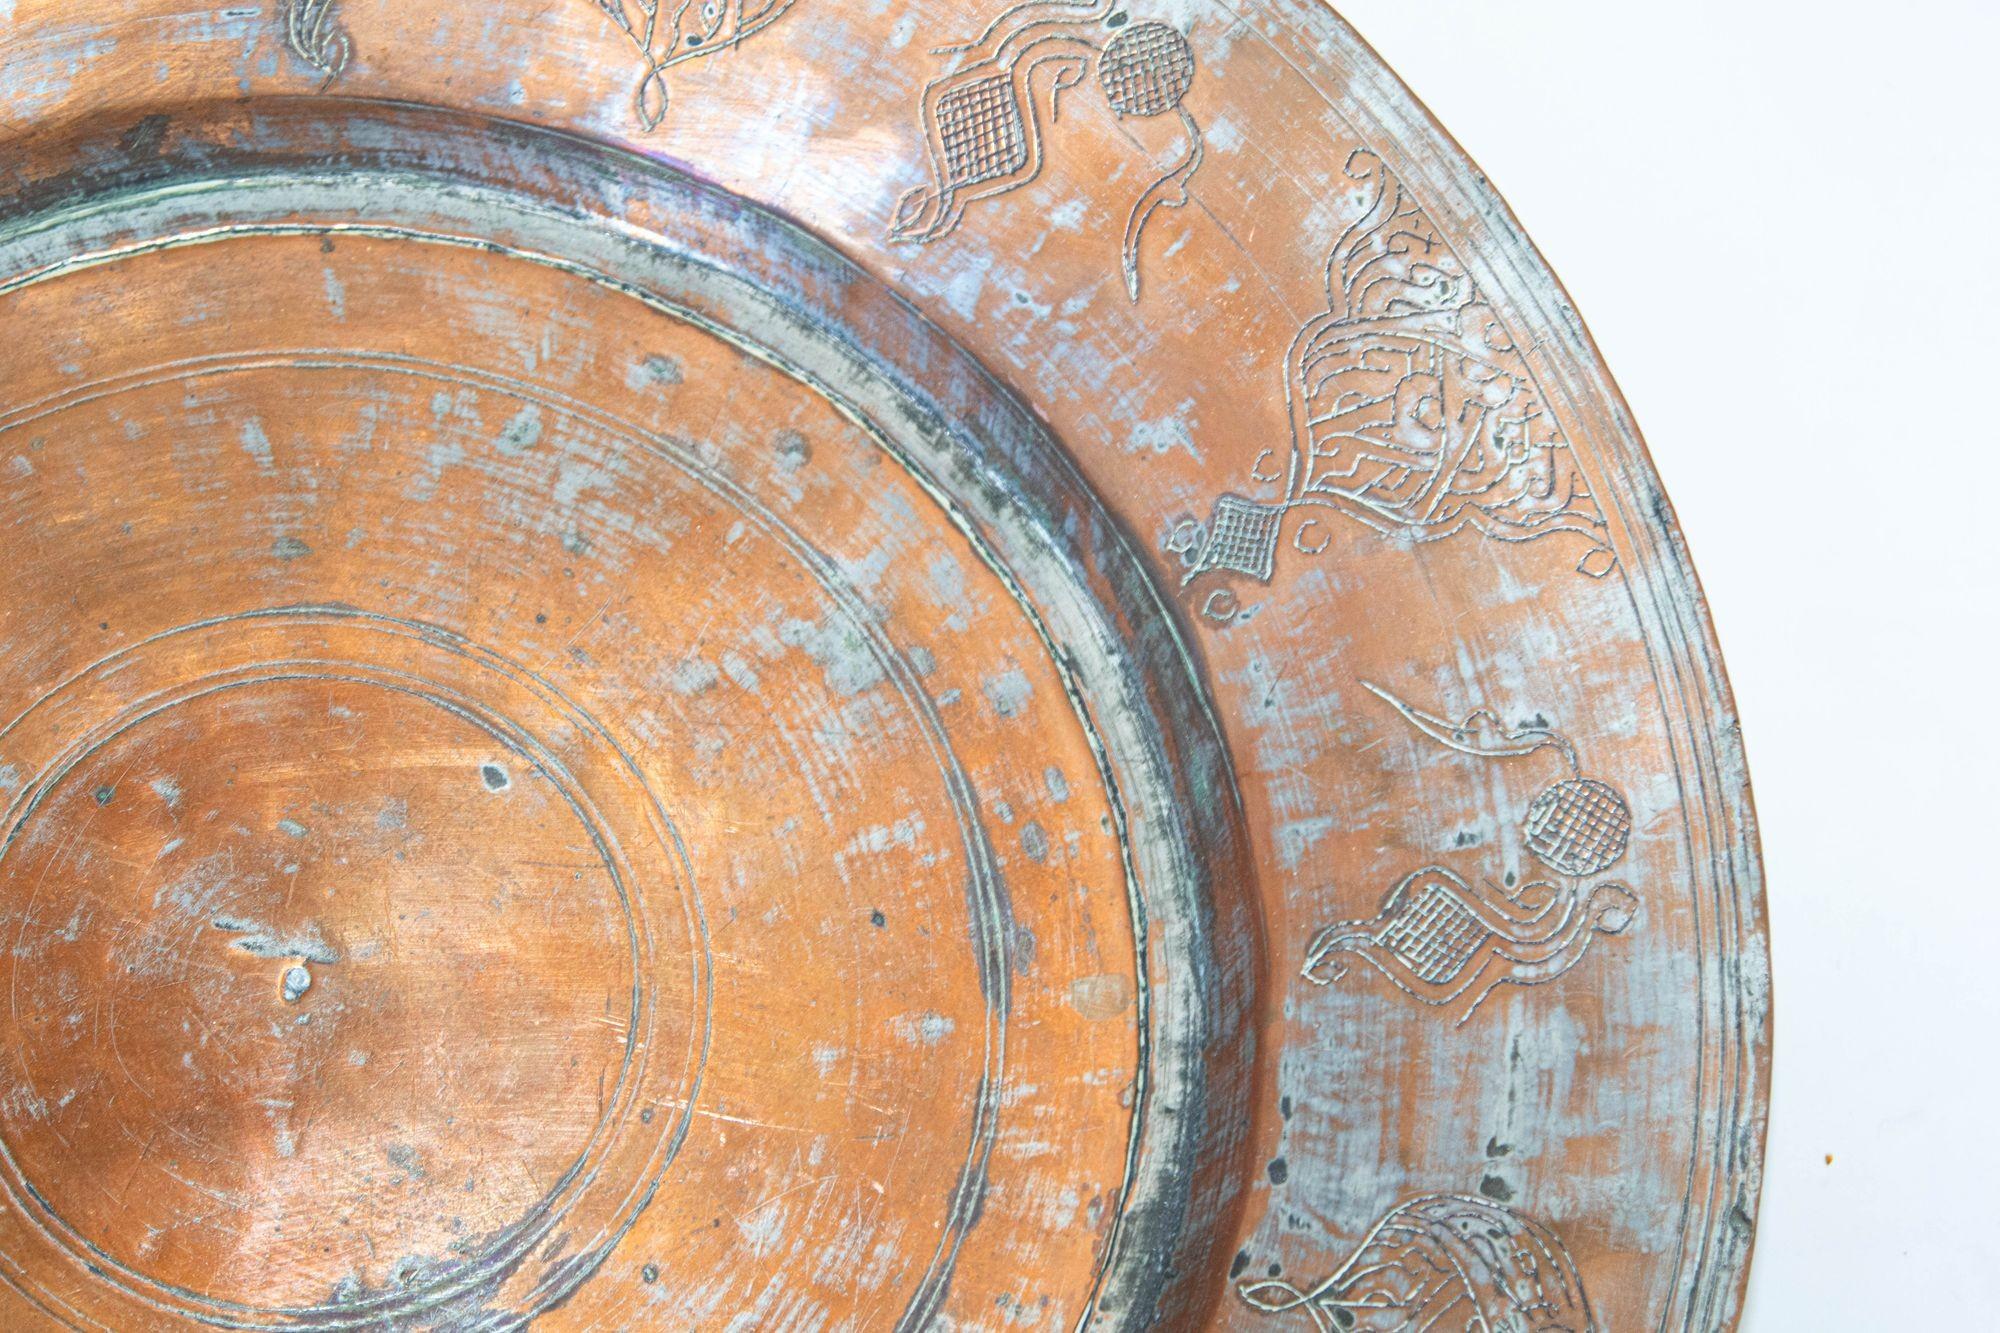 Large Antique Tinned Copper Rajasthani Vessel Bowl 6